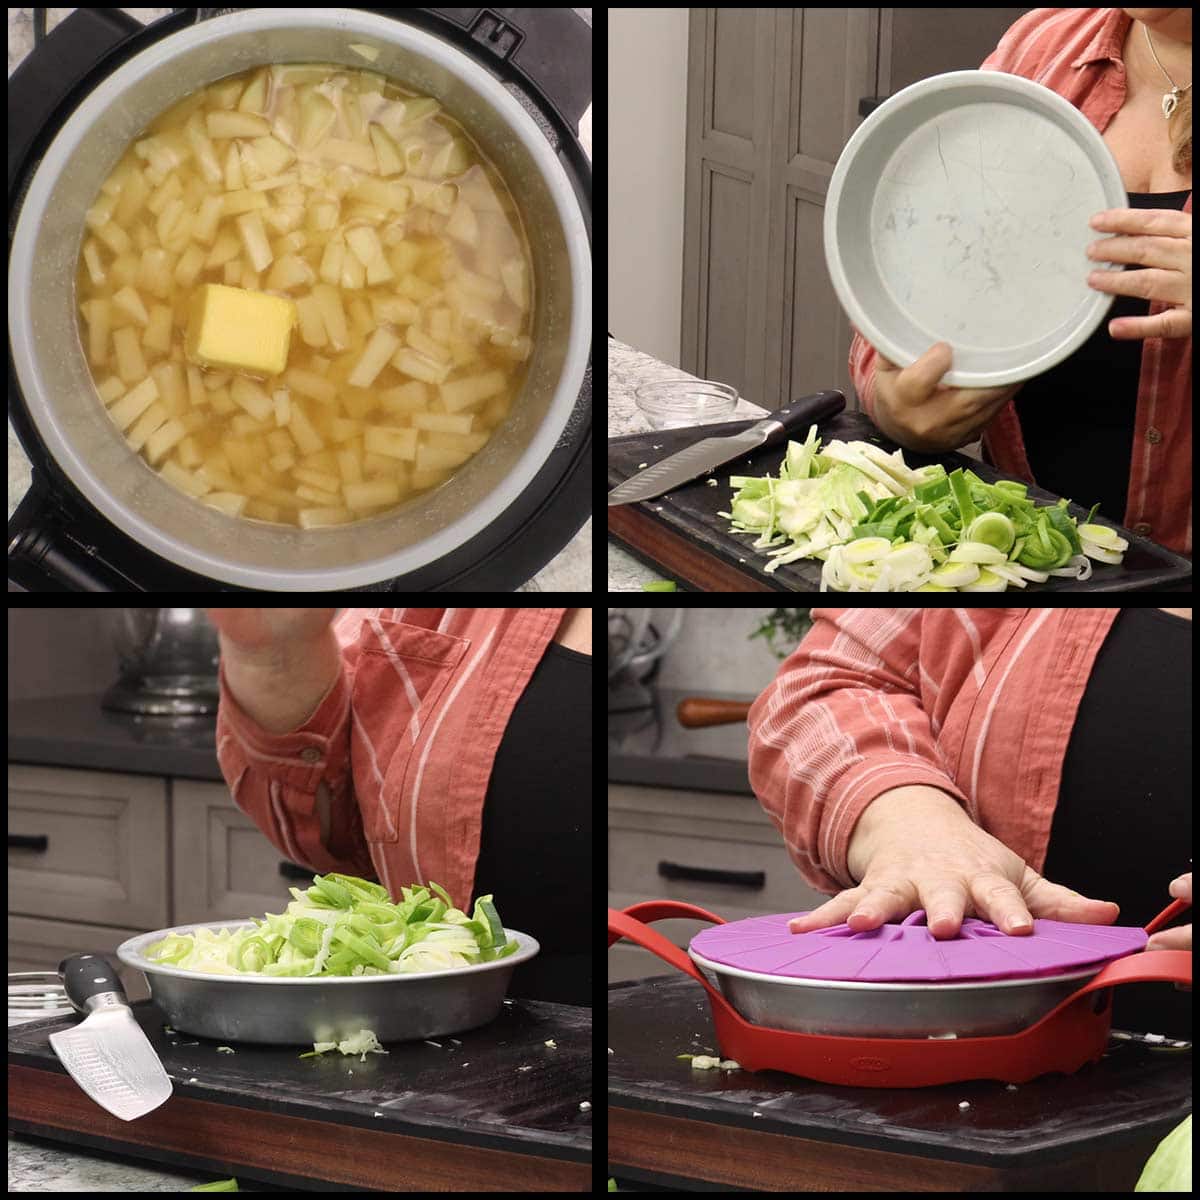 putting the leeks and cabbage in pan to pressure cook above the chopped potatoes.